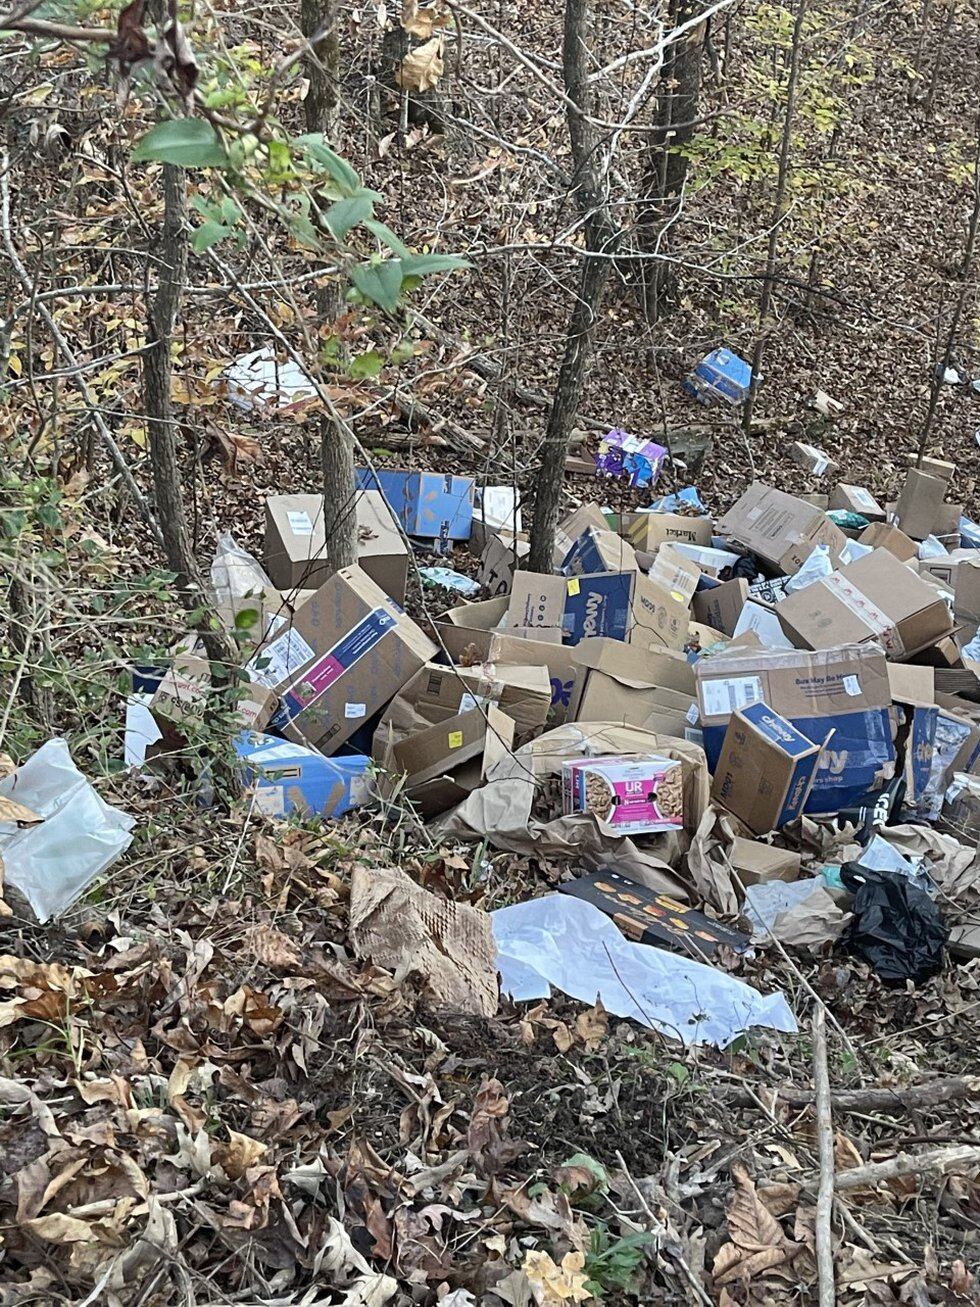 Packages thrown off ravine in Blount County